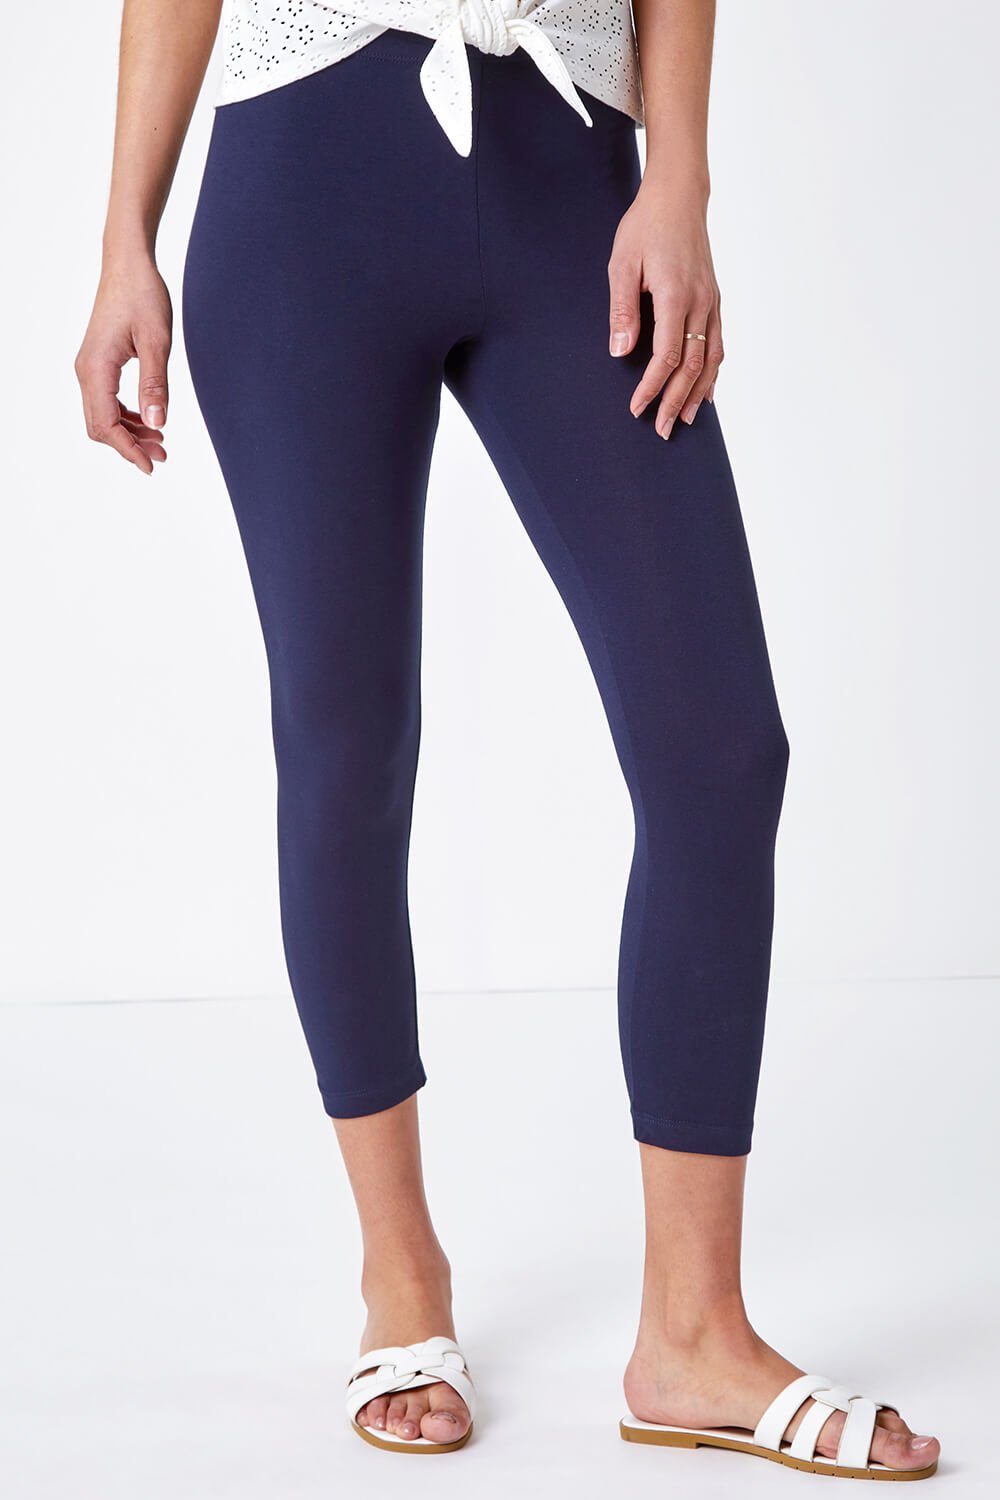 Buy Rinse Blue Cropped Denim Jersey Capri Leggings from Next Luxembourg